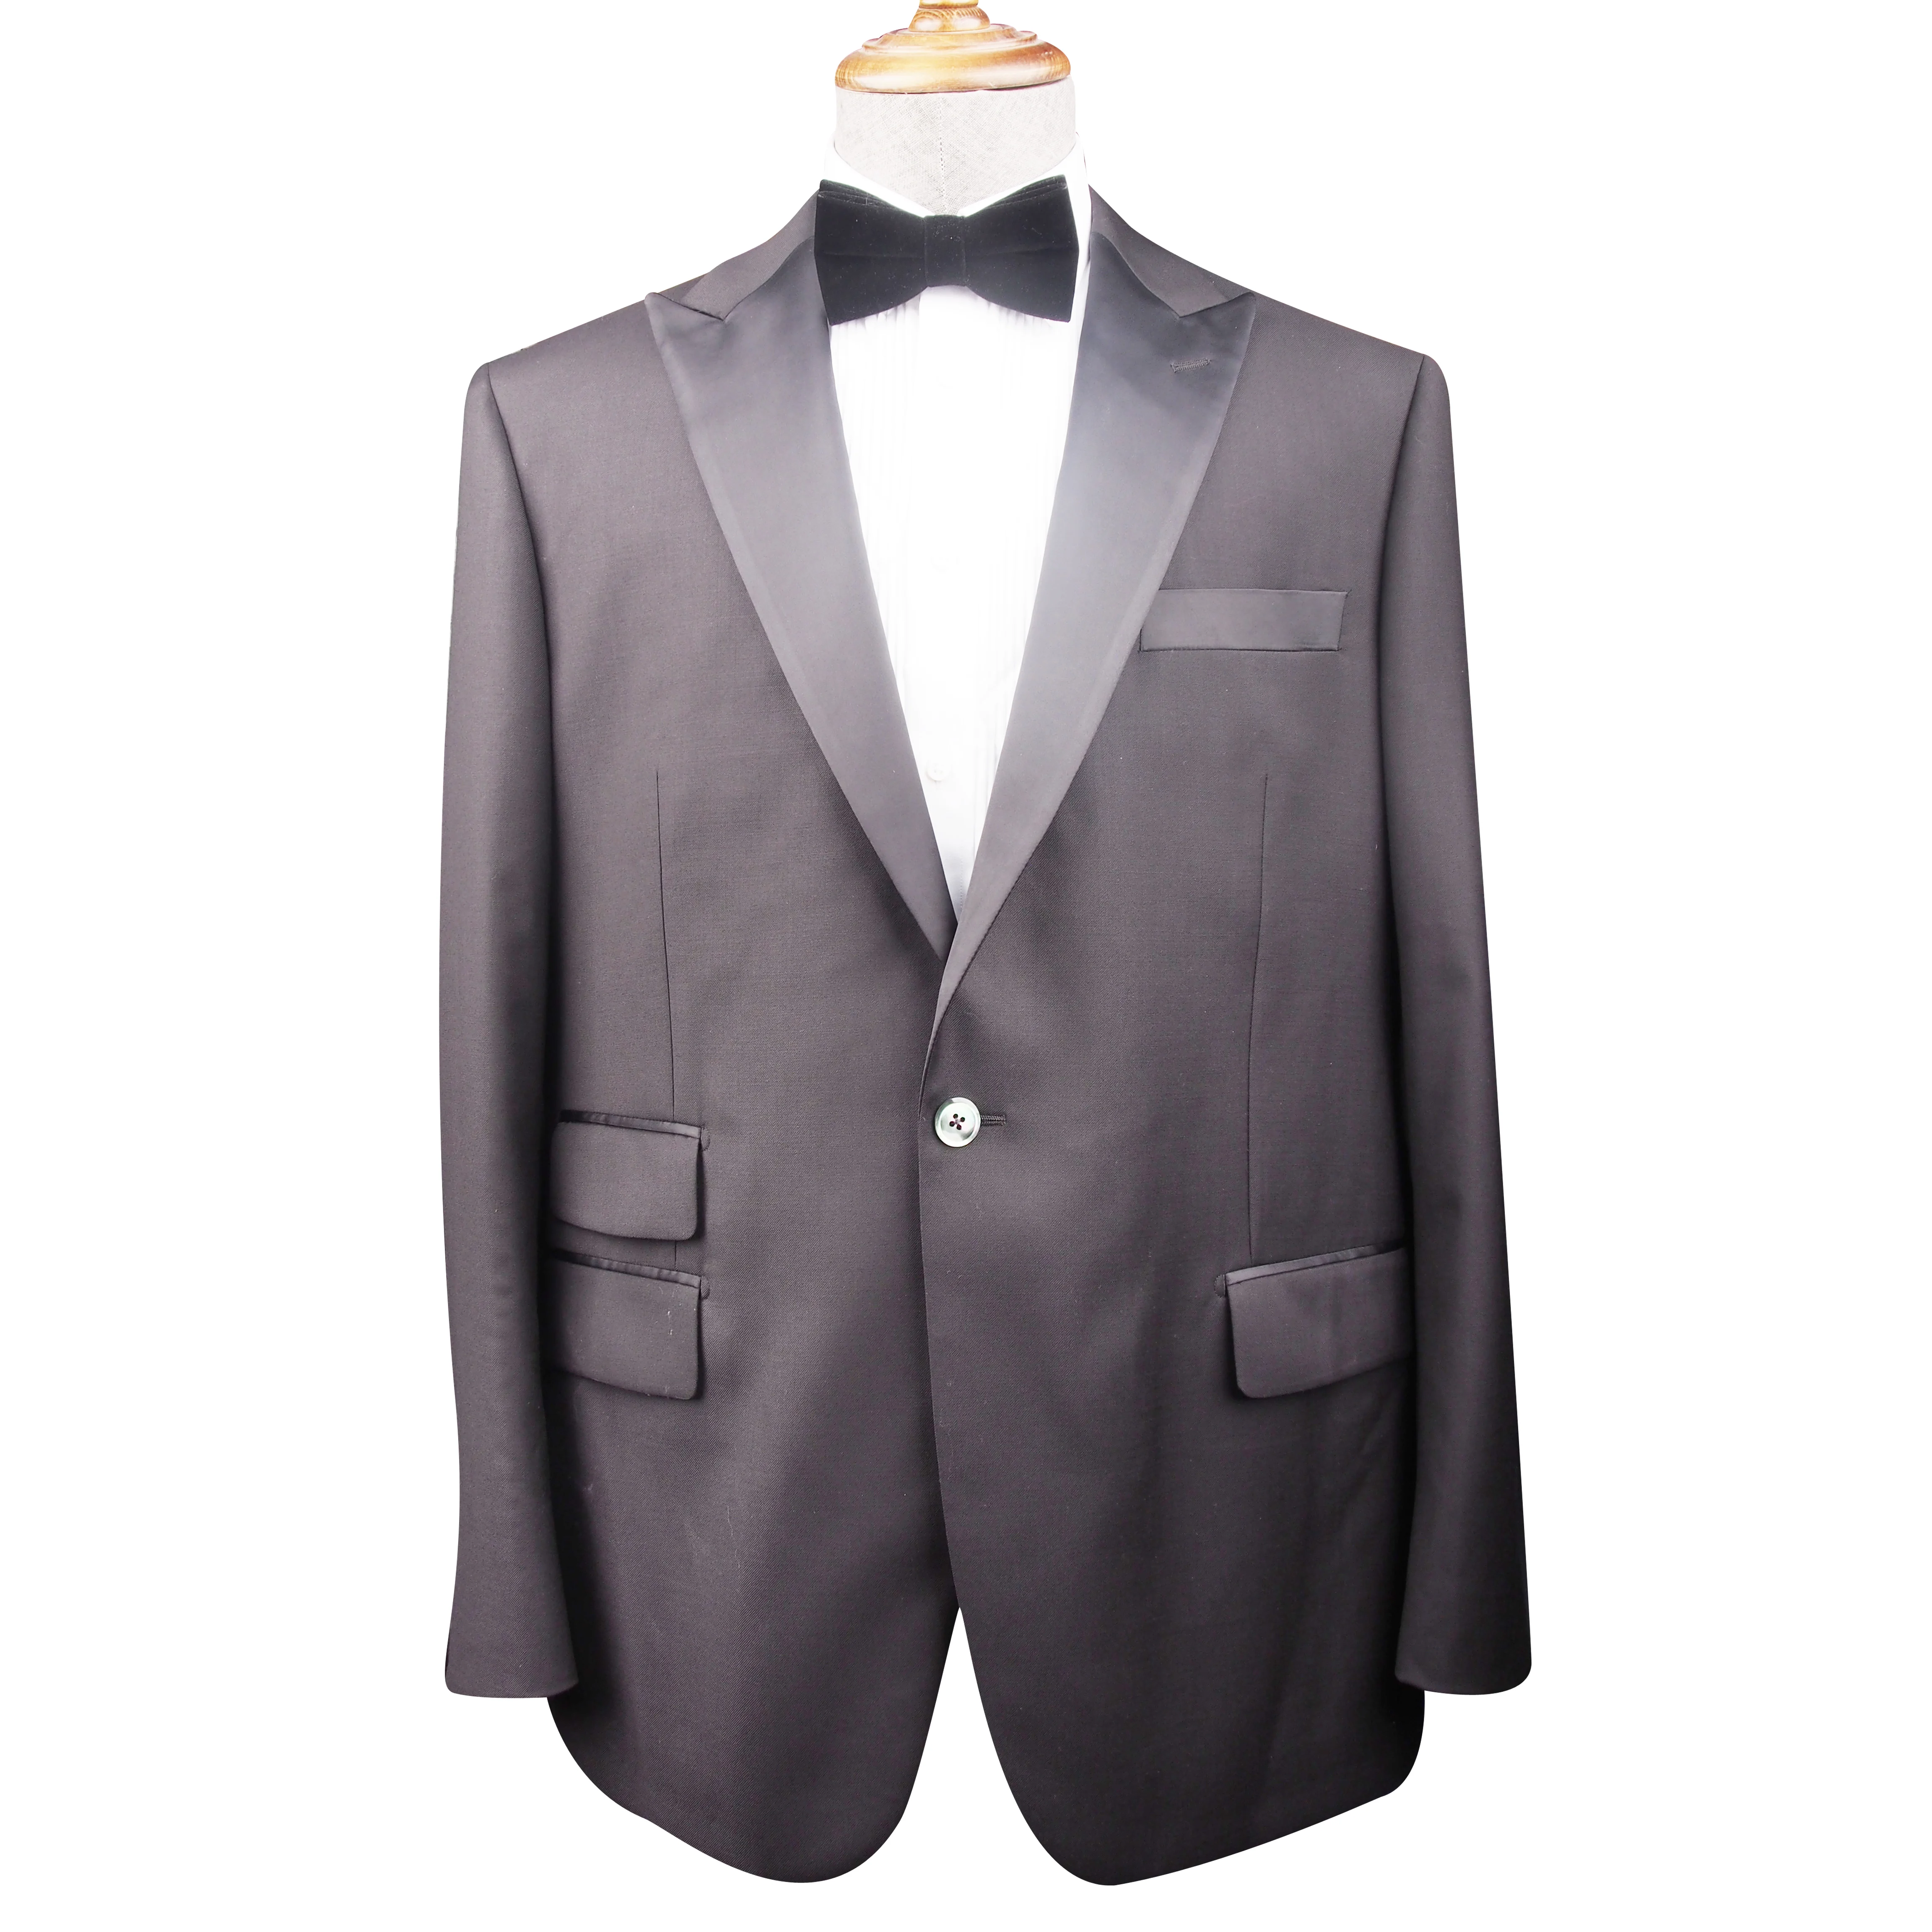 made in China wholesale 2 Stücke 100% Wool  Tuxedo Suit modern men's suit